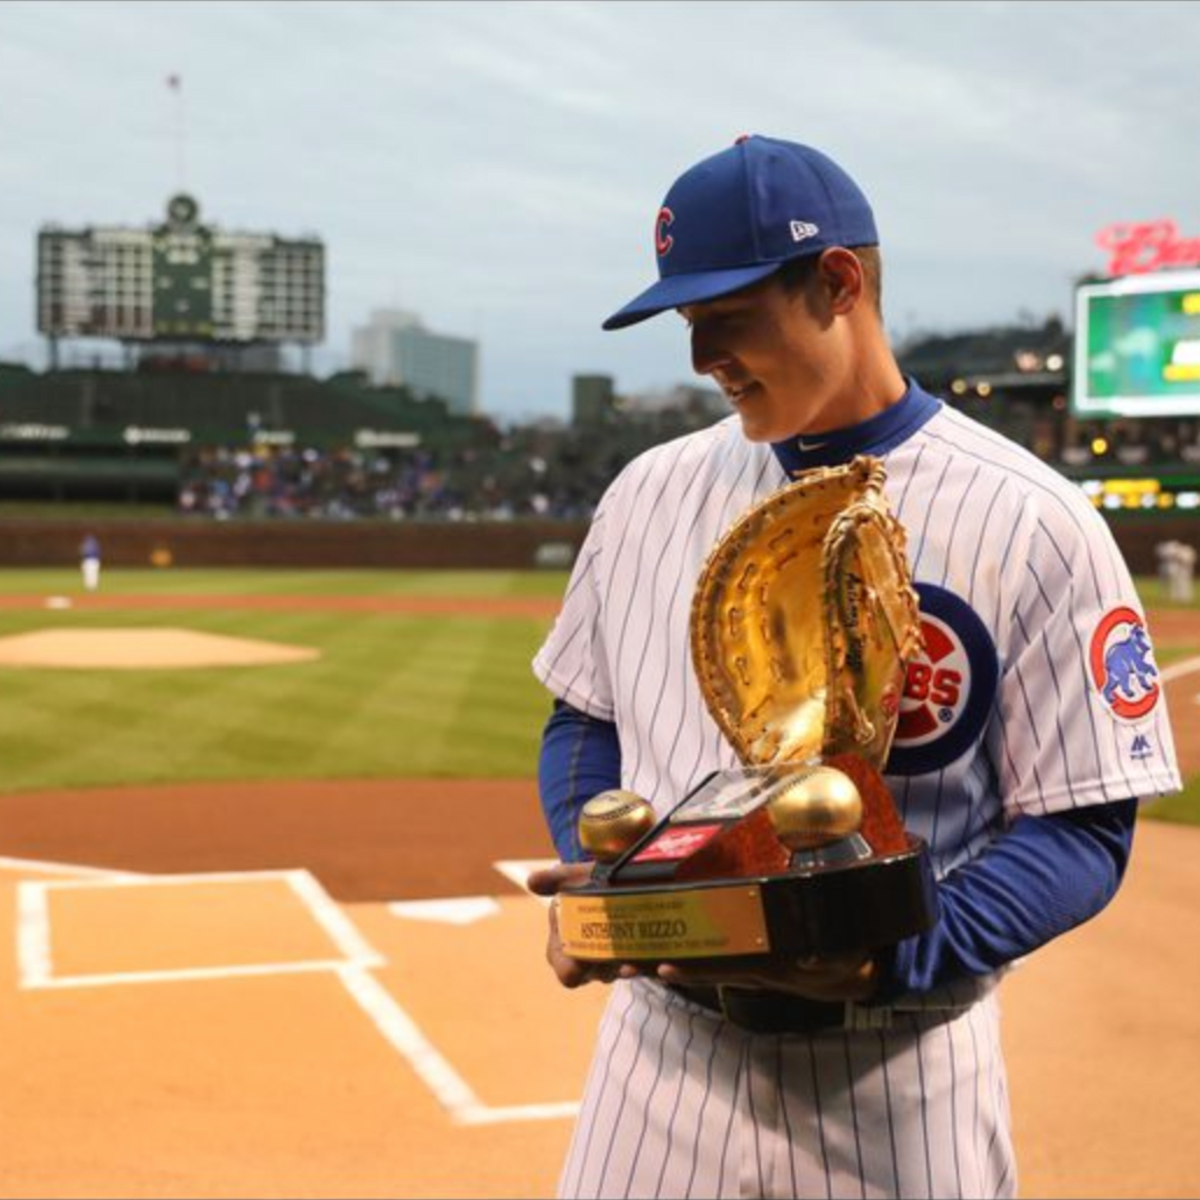 Anthony Rizzo's 2020 option picked up